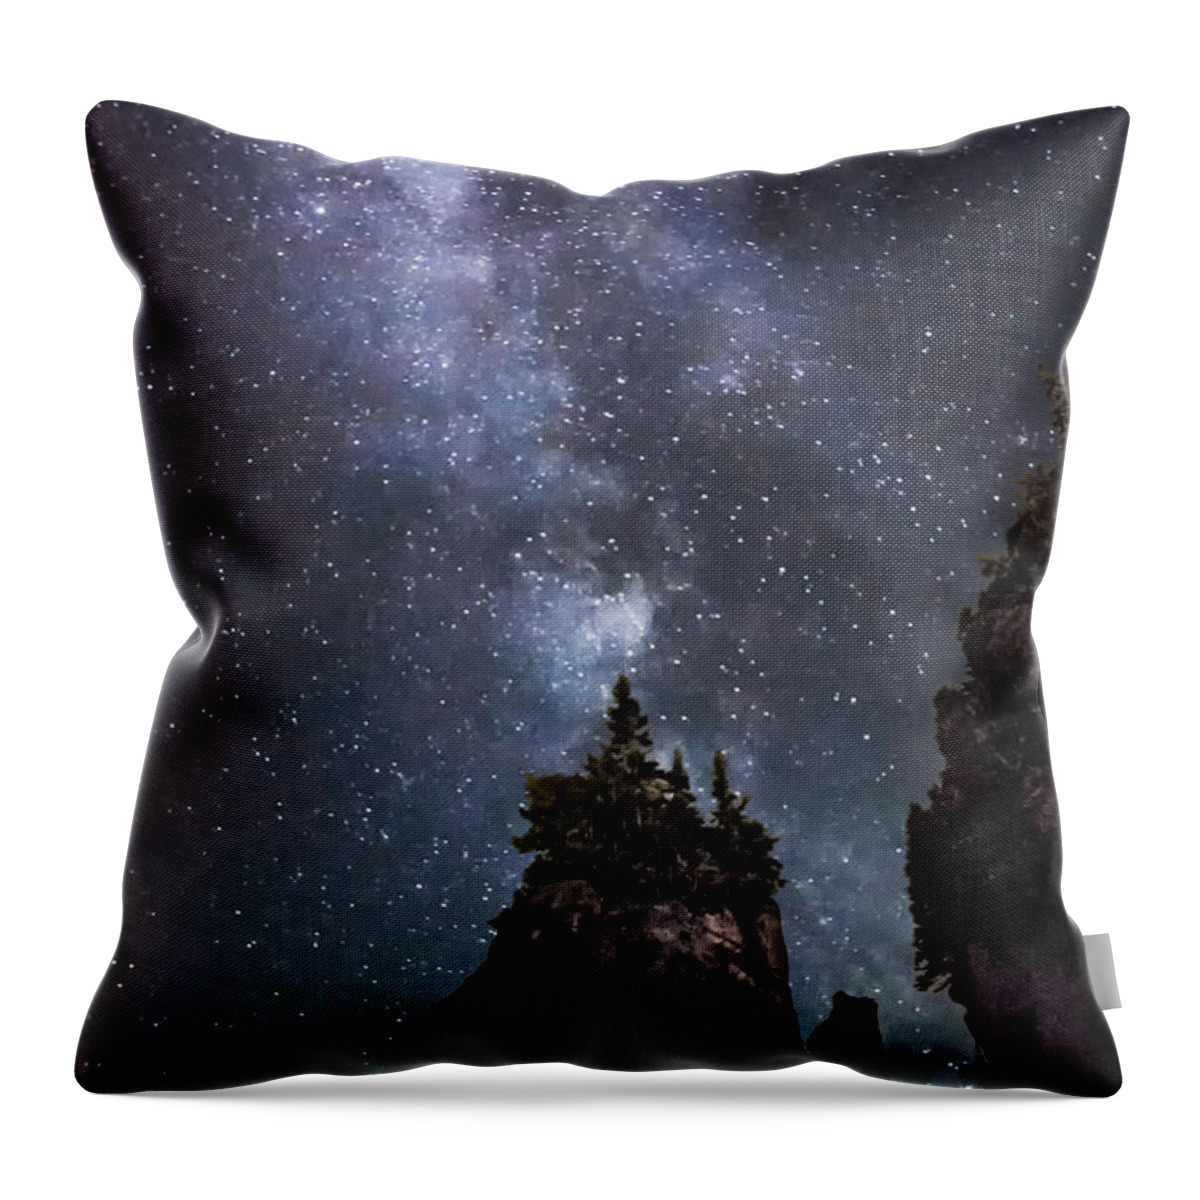 Hopewell Rocks Throw Pillow featuring the photograph Hopewell Rocks Milky Way by Linda Villers